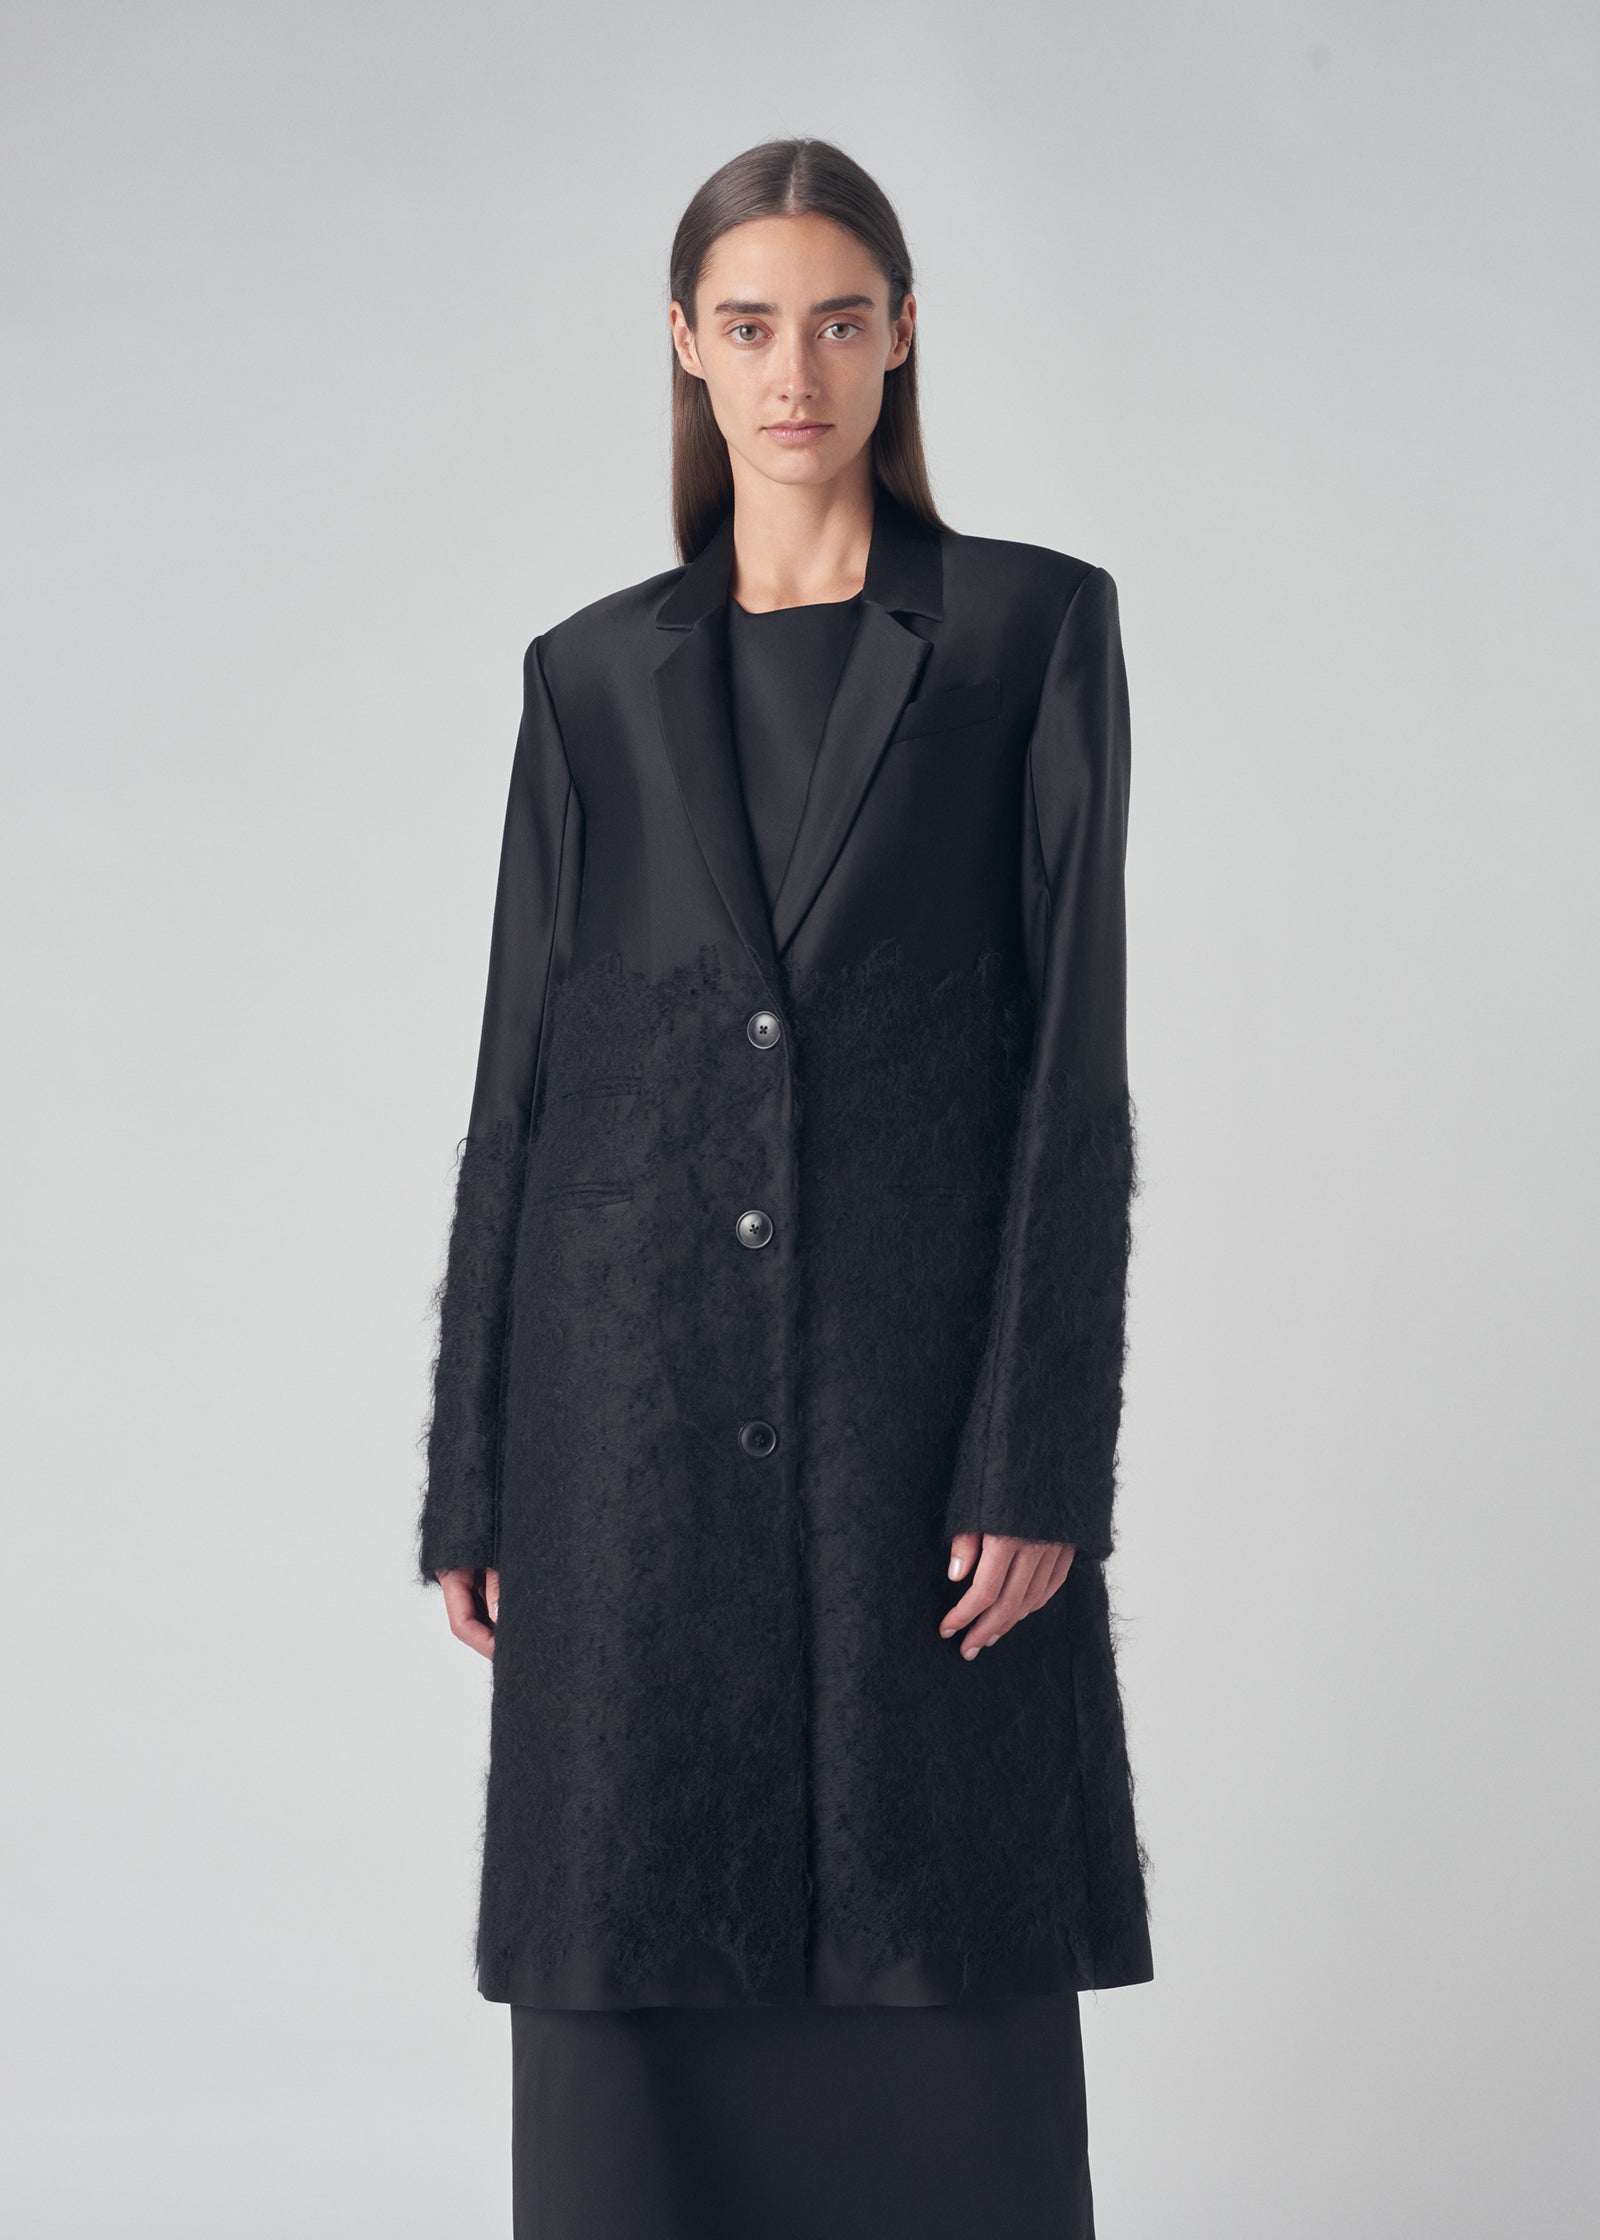 Embroidered Evening Coat in Duchess Satin - Black - CO Collections